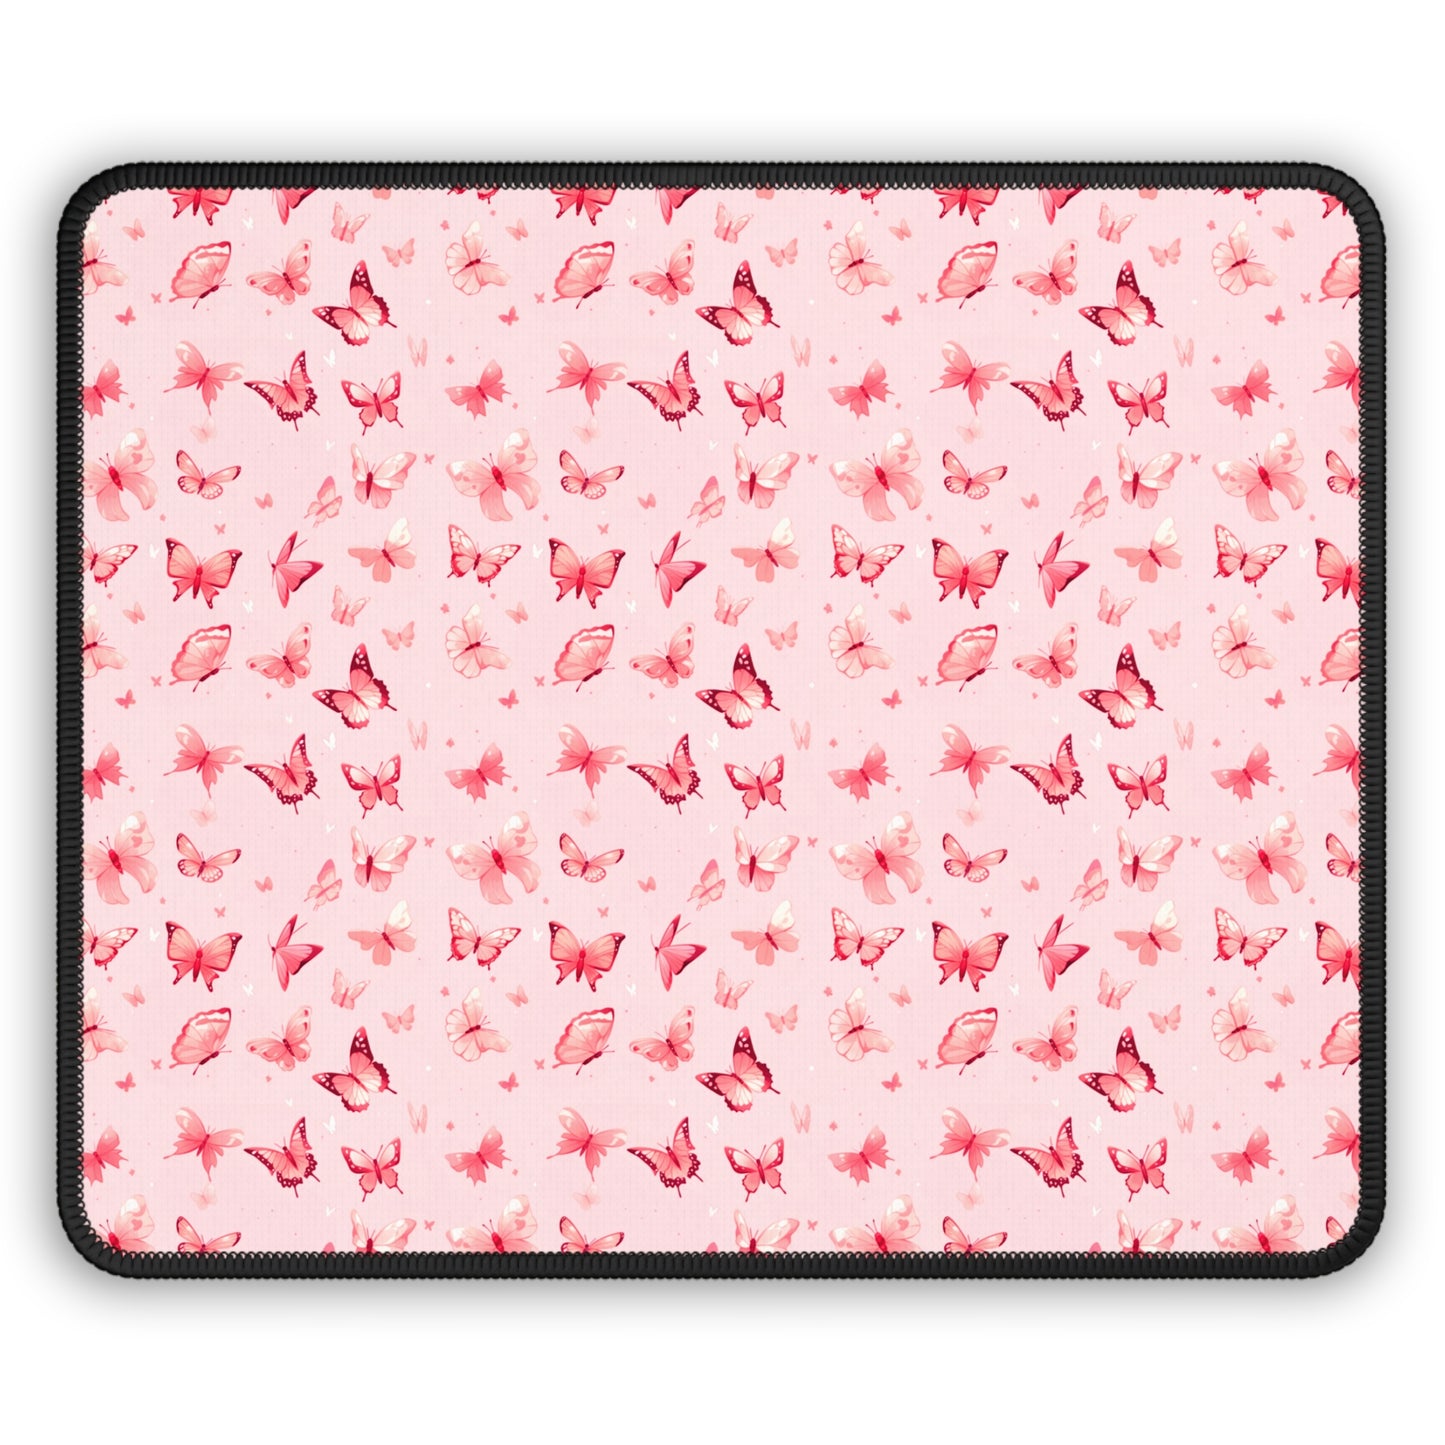 Whimsical Pink Butterflies Mouse Pad